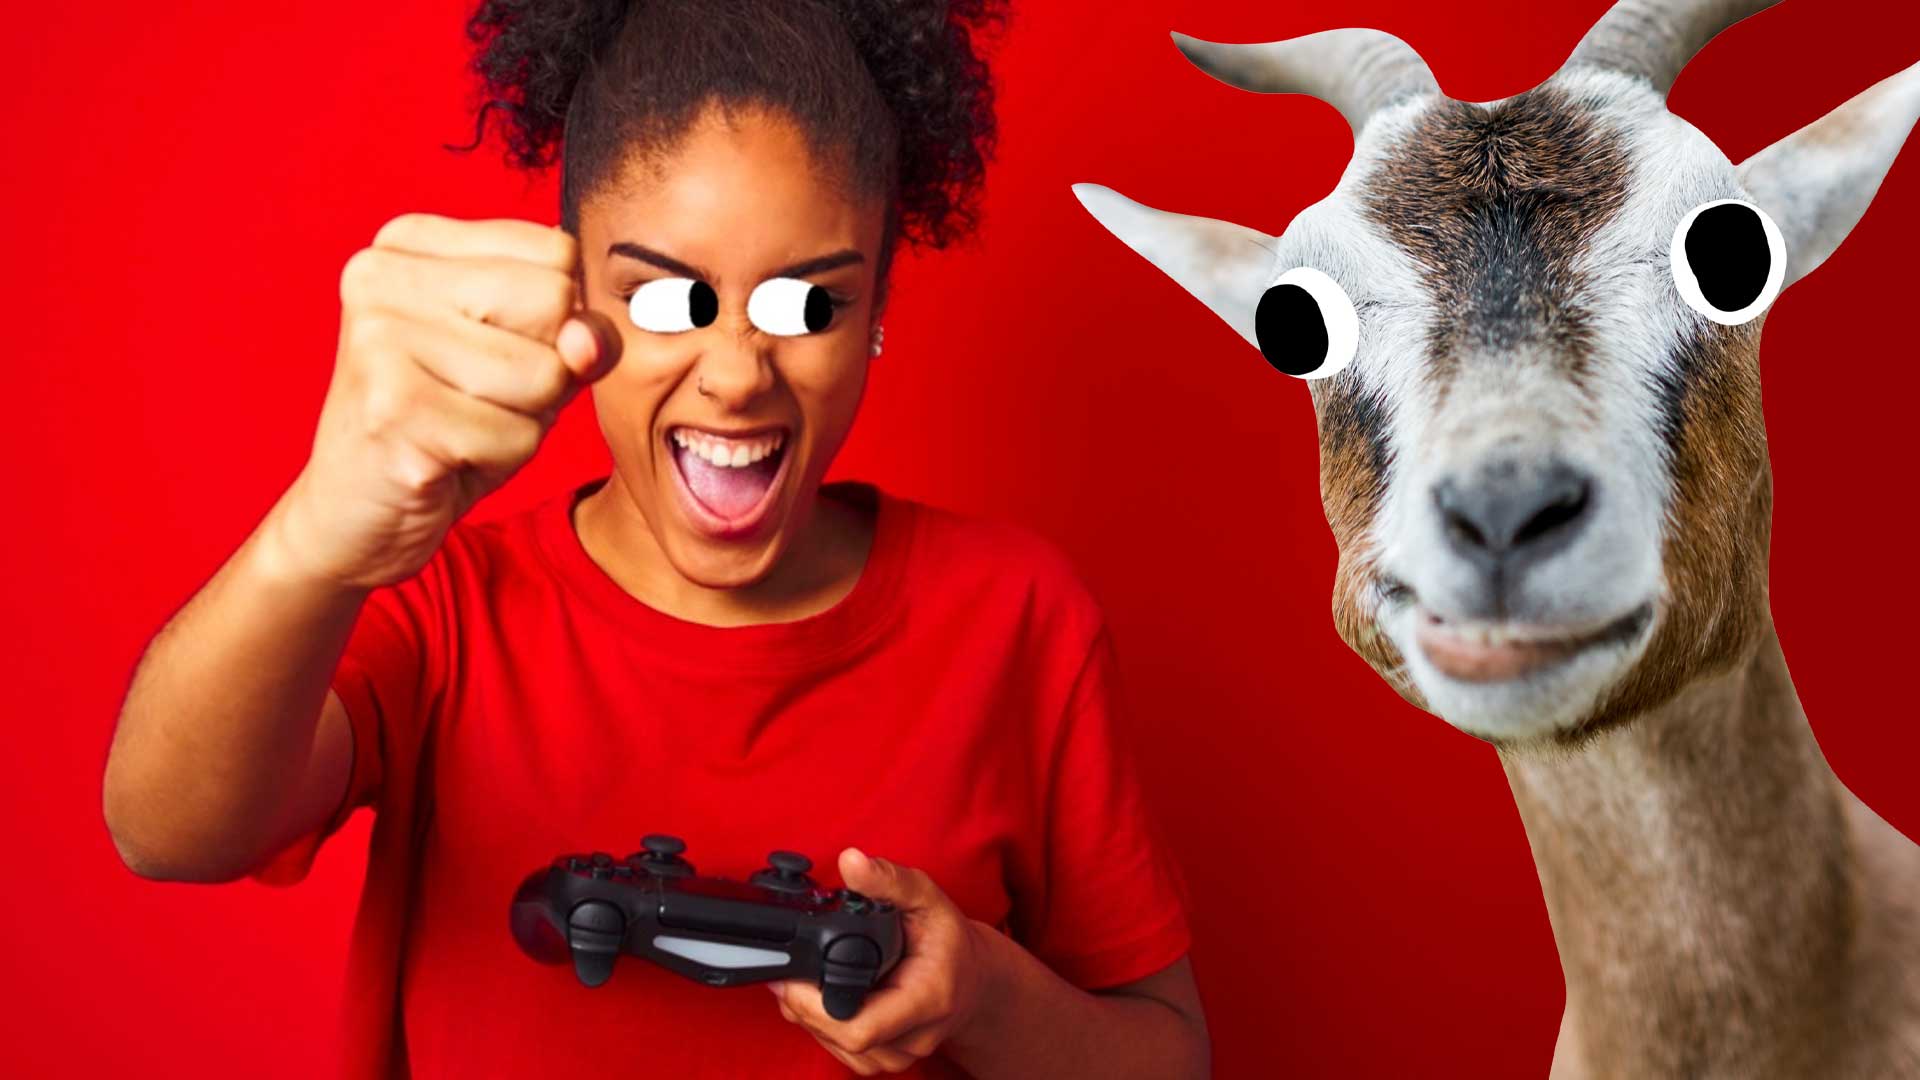 A gamer and a goat